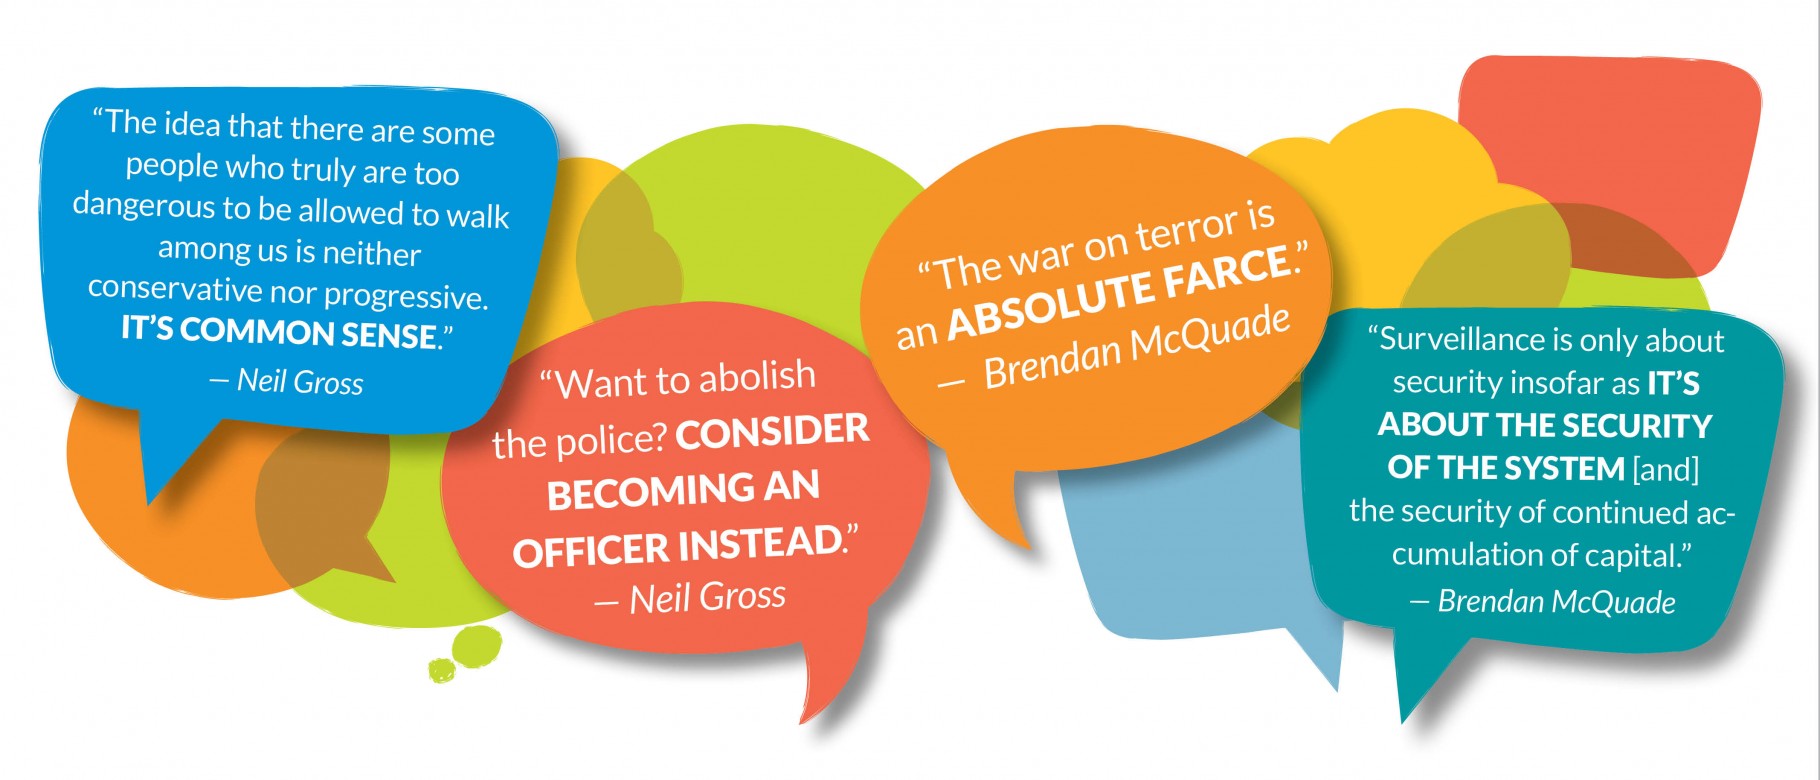 Speech bubbles show text from upcoming President's Forum speakers Neil Gross and Brendan McQuade